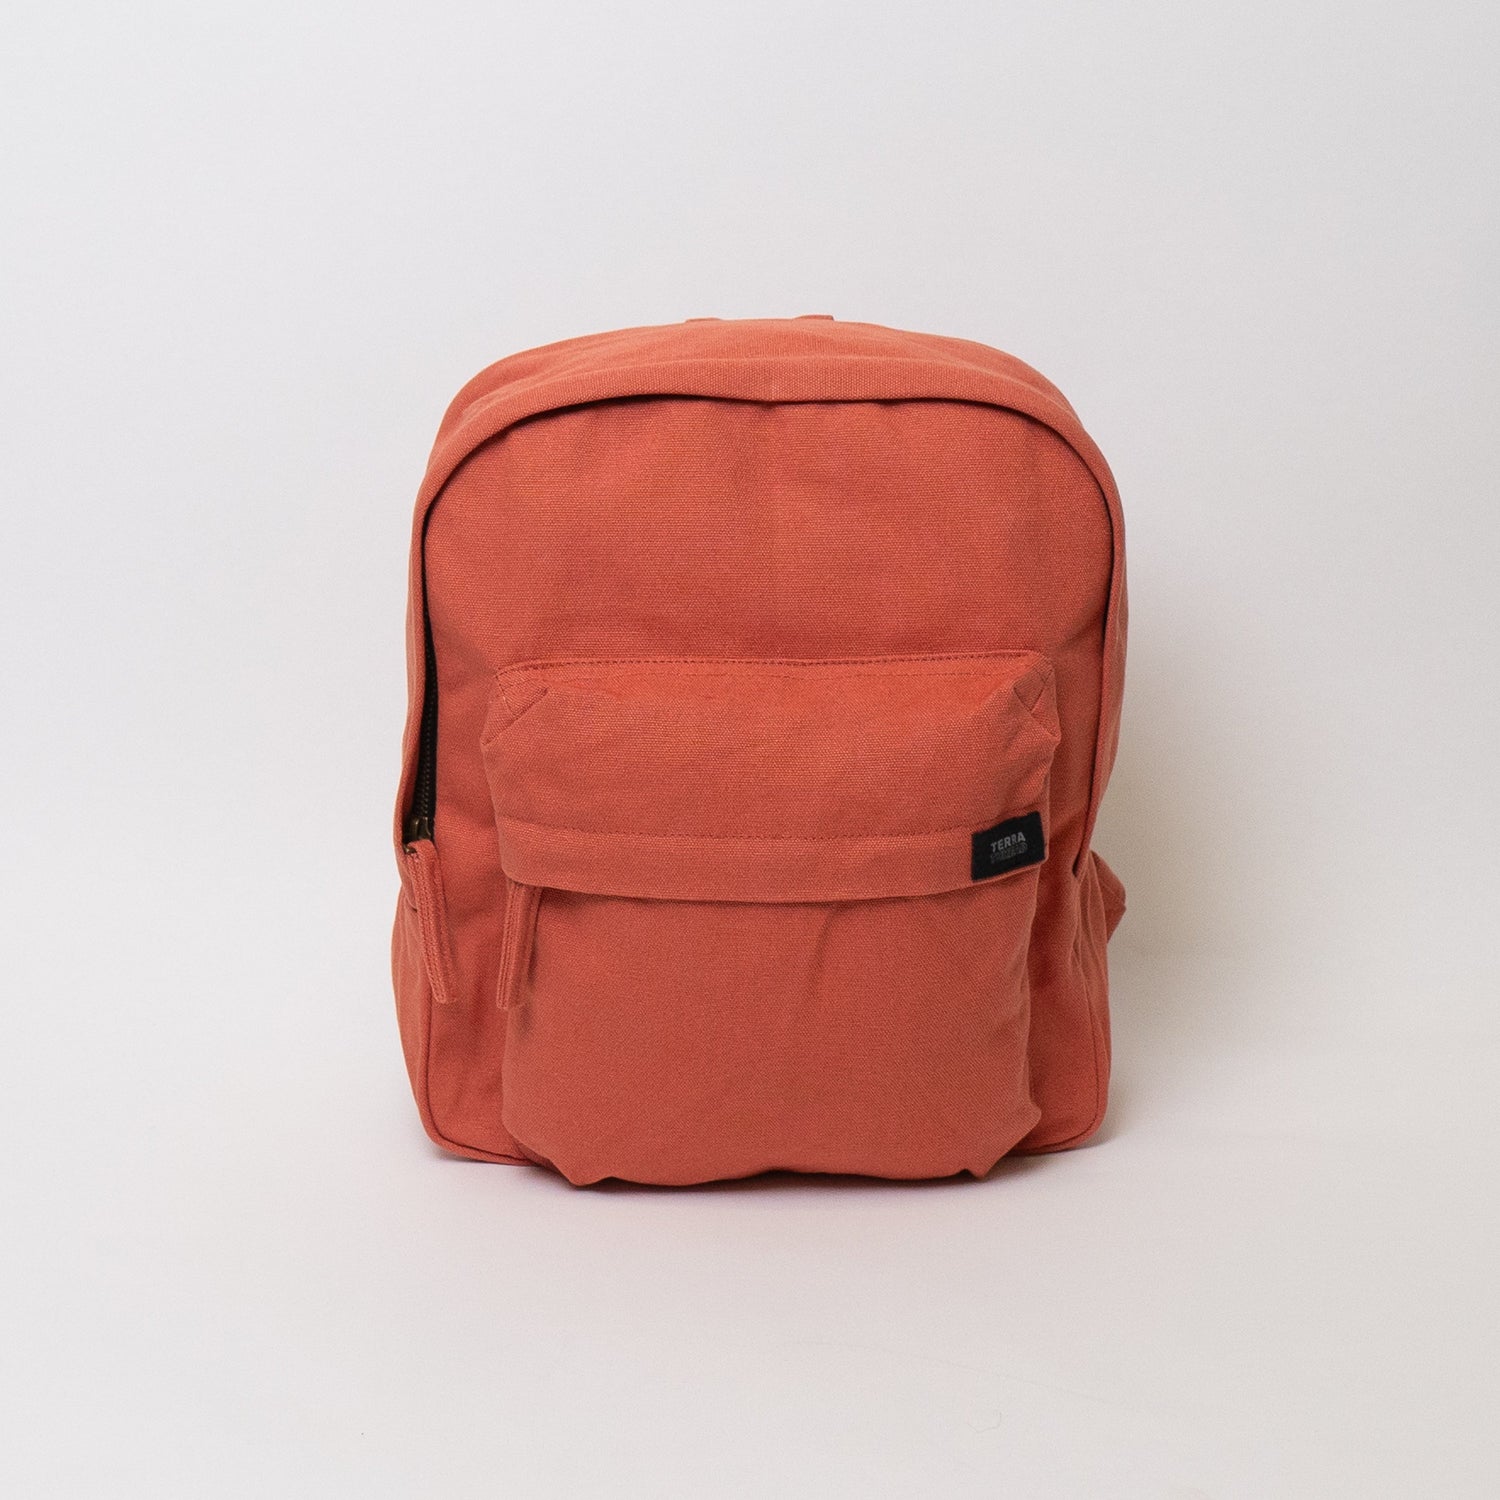 Sustainable Canvas Mini Backpack for Everyday Use – Terra Thread